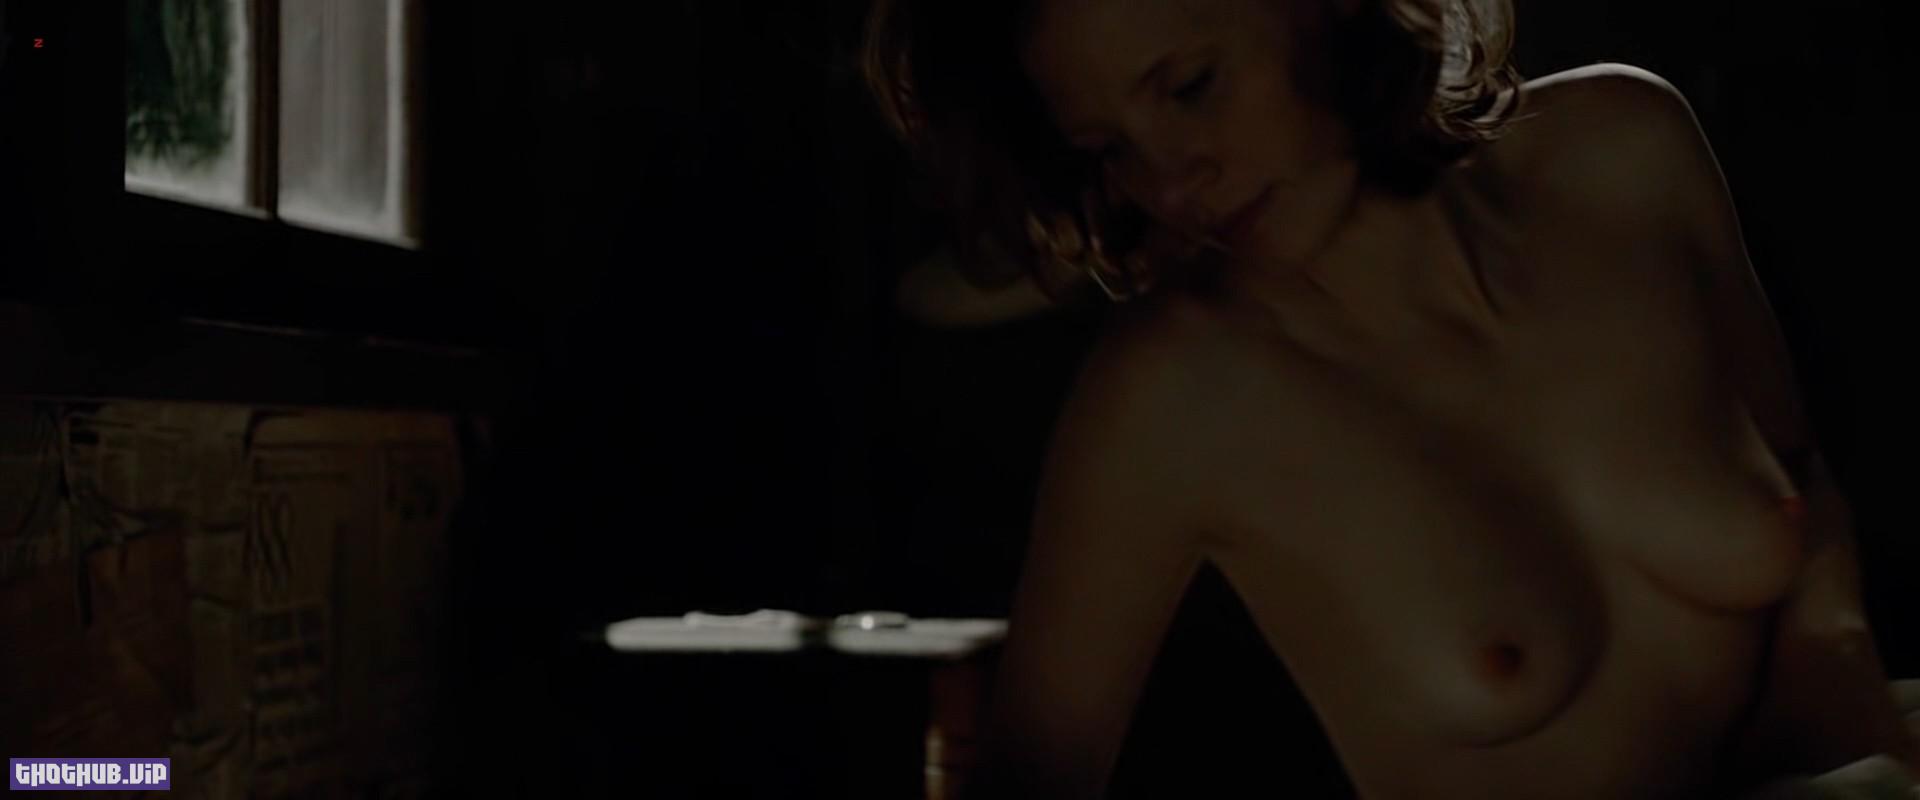 Jessica-Chastain-Topless-Nude-12